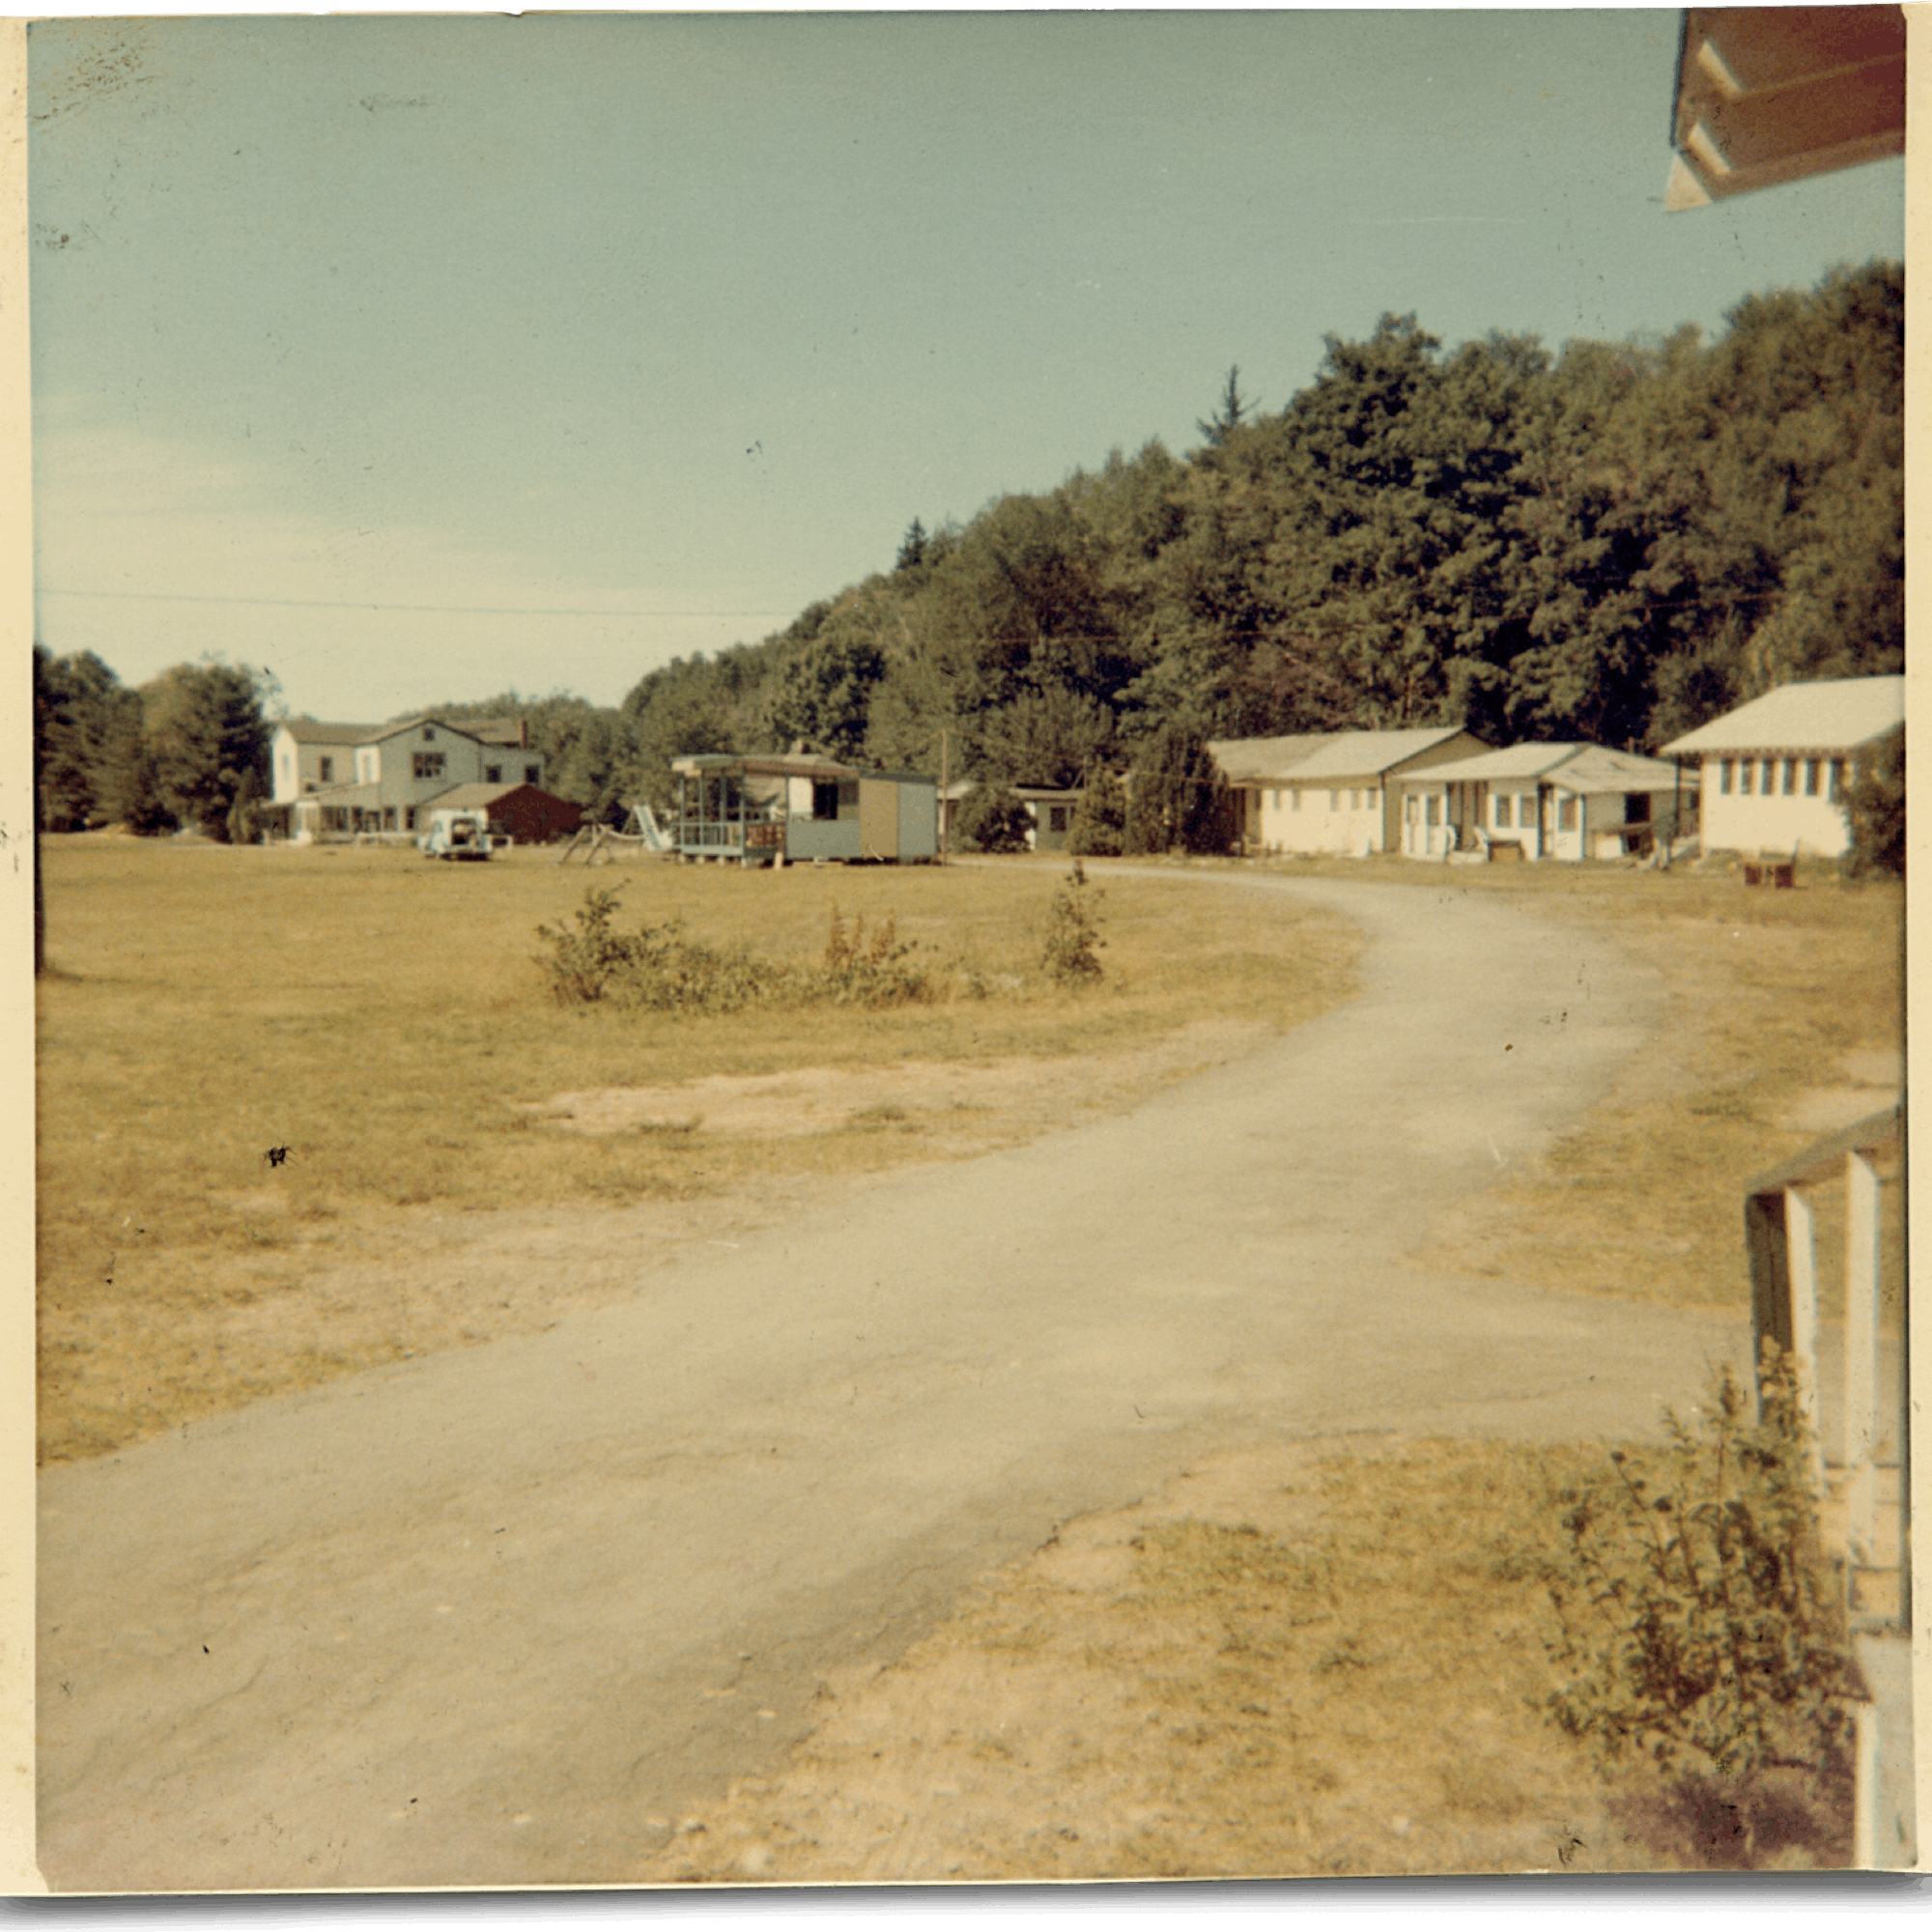 Camp Jened is pictured in a sun-faded photograph. Low, white buildings line the paved road through camp, and trees rise up behind them.